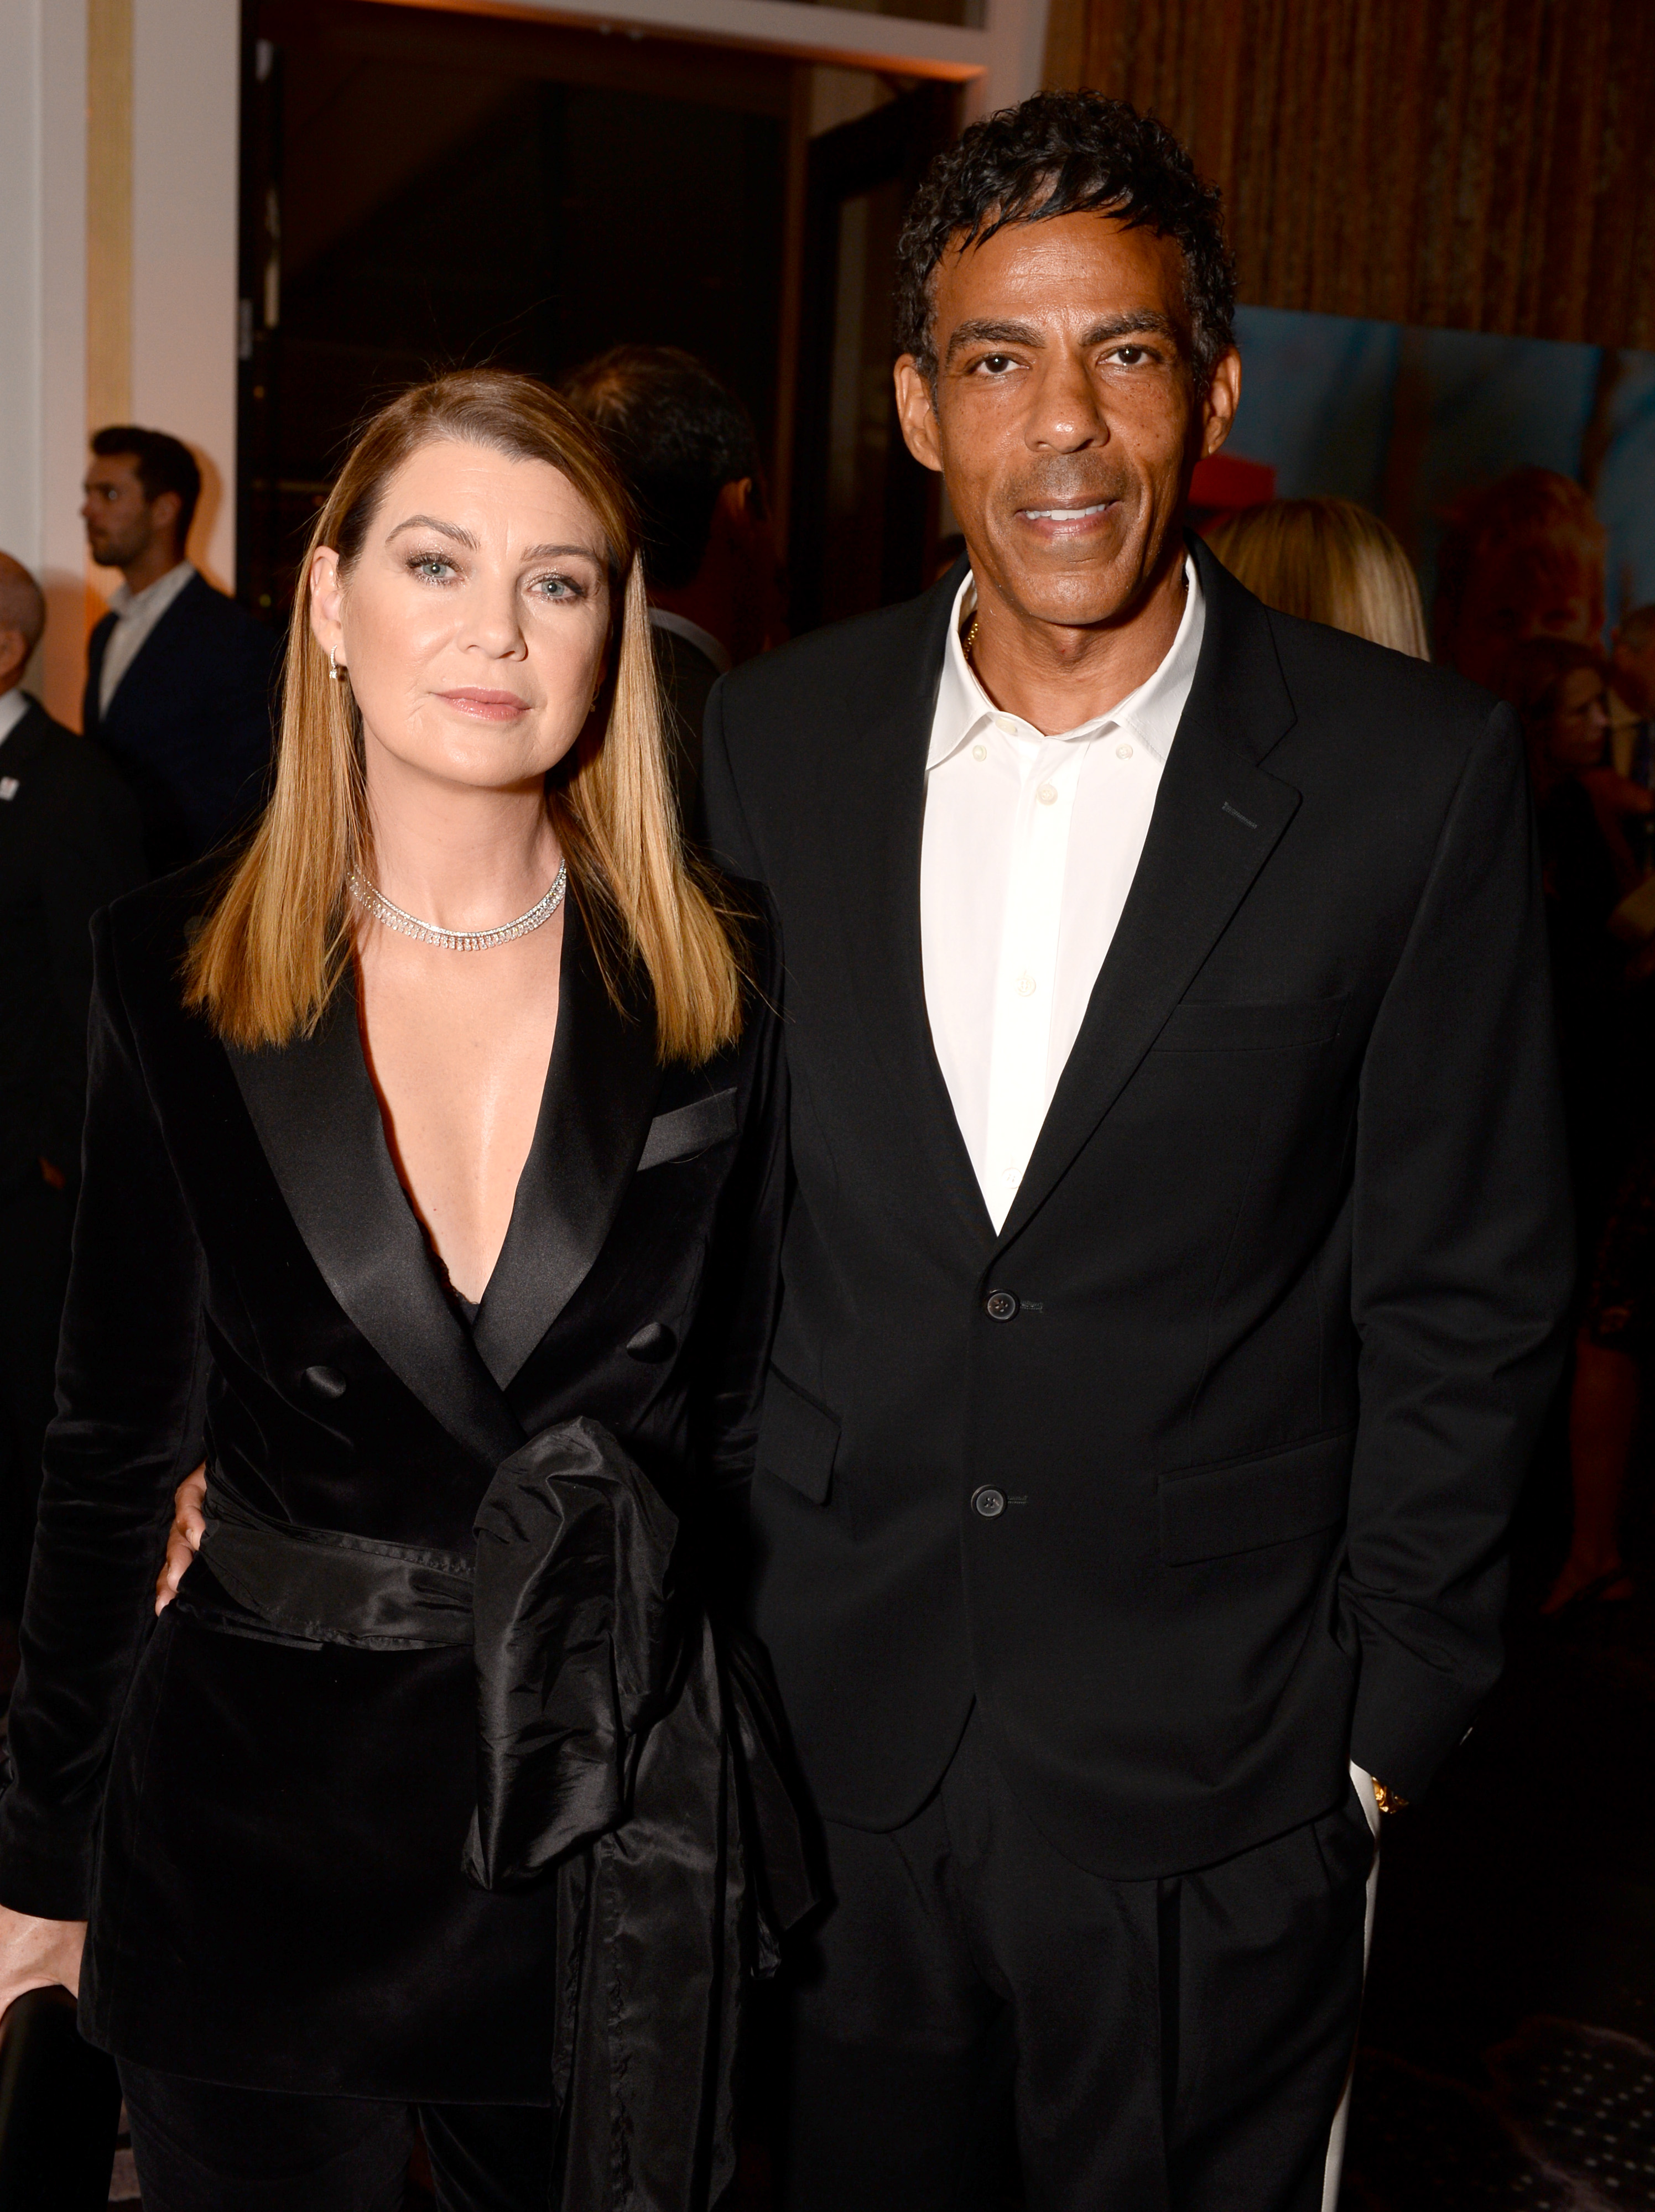 'Grey's Anatomy' star Ellen Pompeo and husband Chris Ivery wearing all-black outfits at an event.